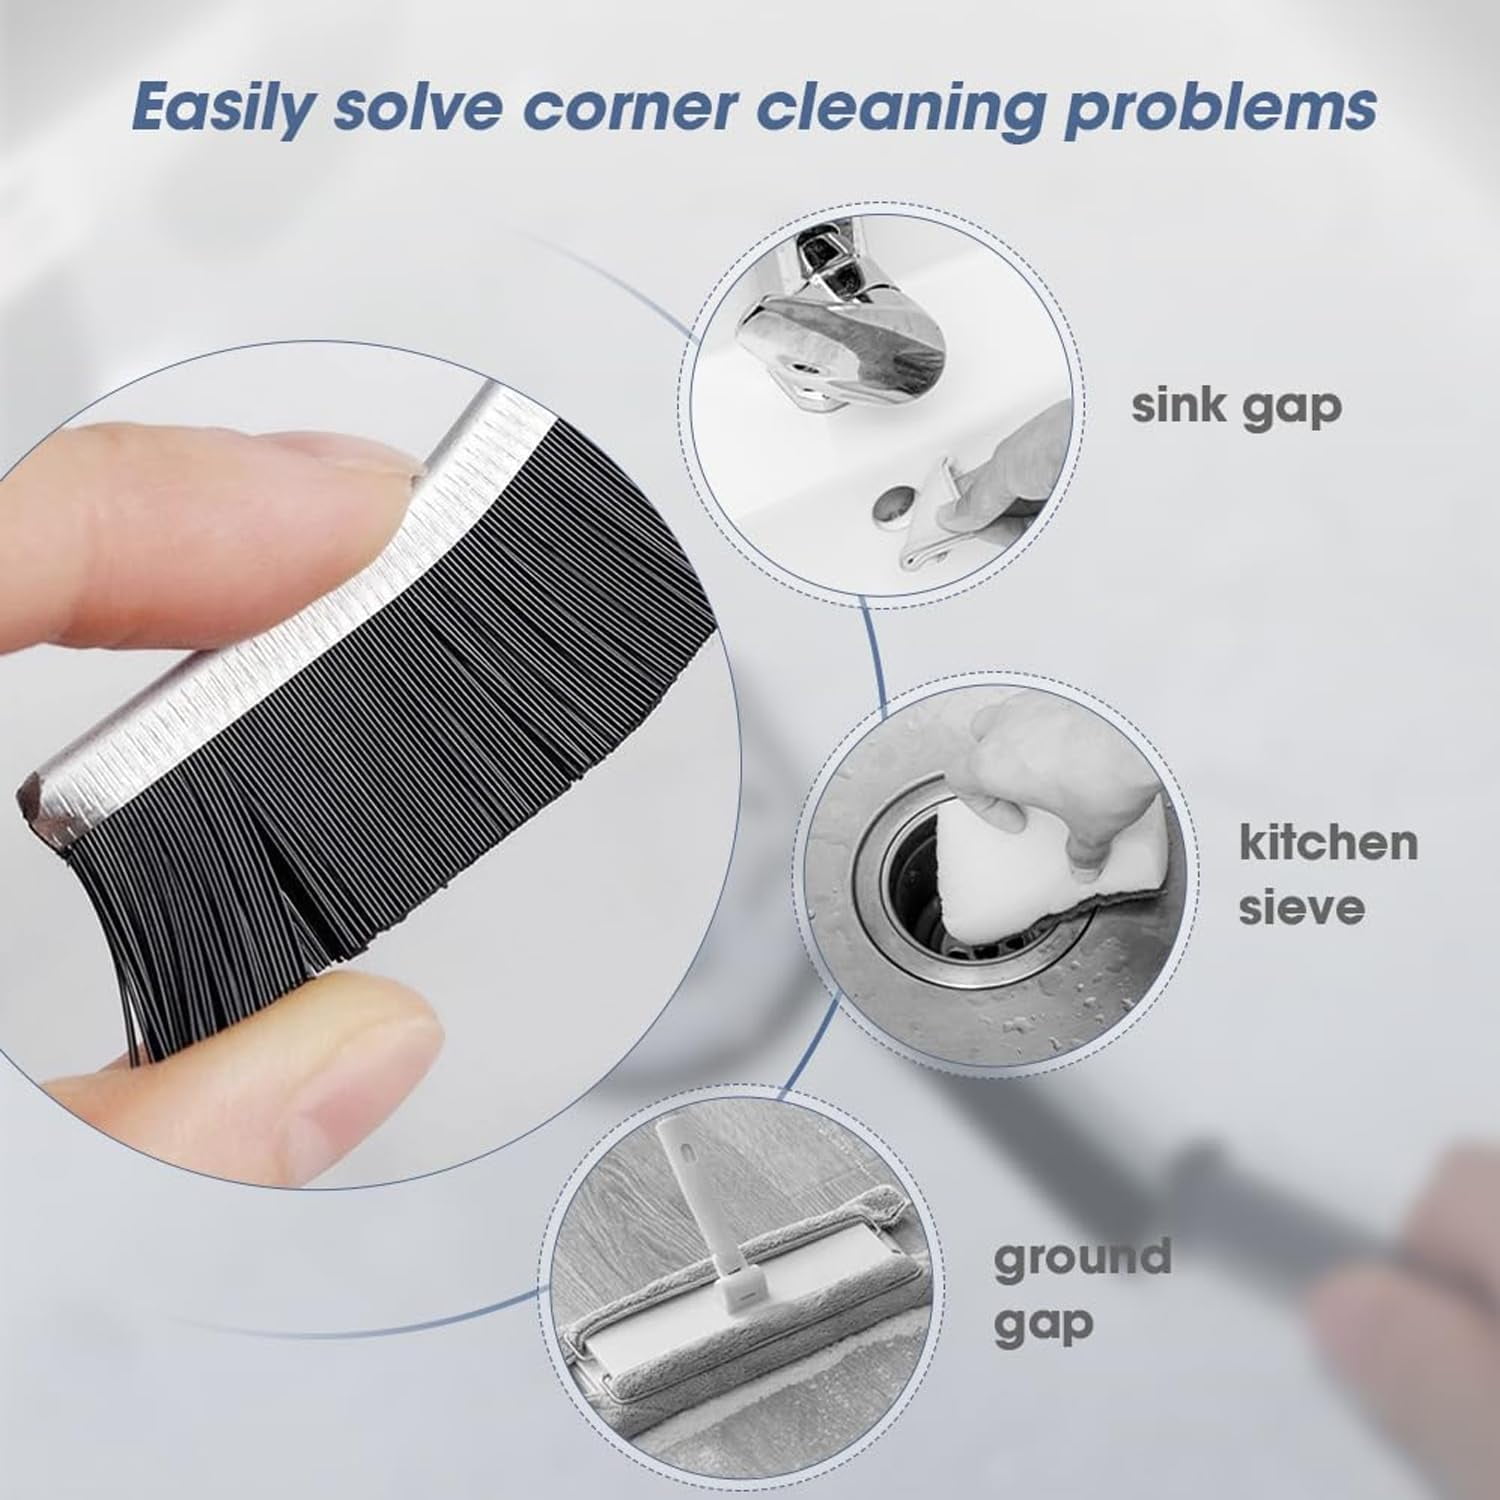 4 Pcs Hard Bristle Crevice Cleaning Brush, Multifunctional Gap Cleaning  Brushes, Crevice Cleaning Tool, Groove Grout Cleaner Brush, Price $10. For  USA. Interested DM me for Details : r/ReviewClub